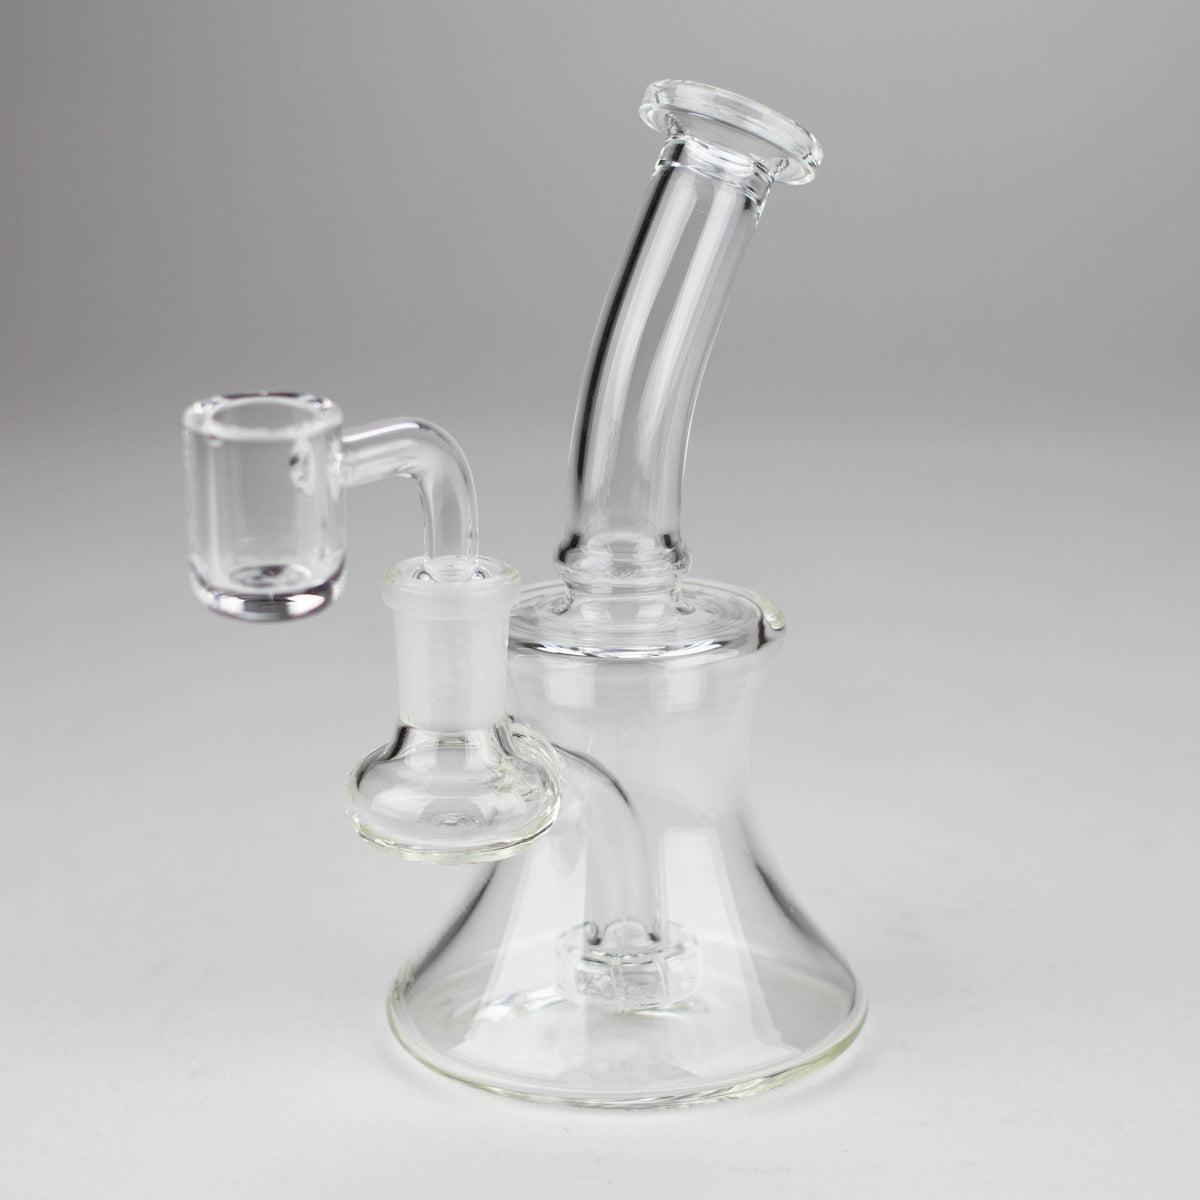 Bent Neck Stemless Rig w Showerhead Diffuser clear glass